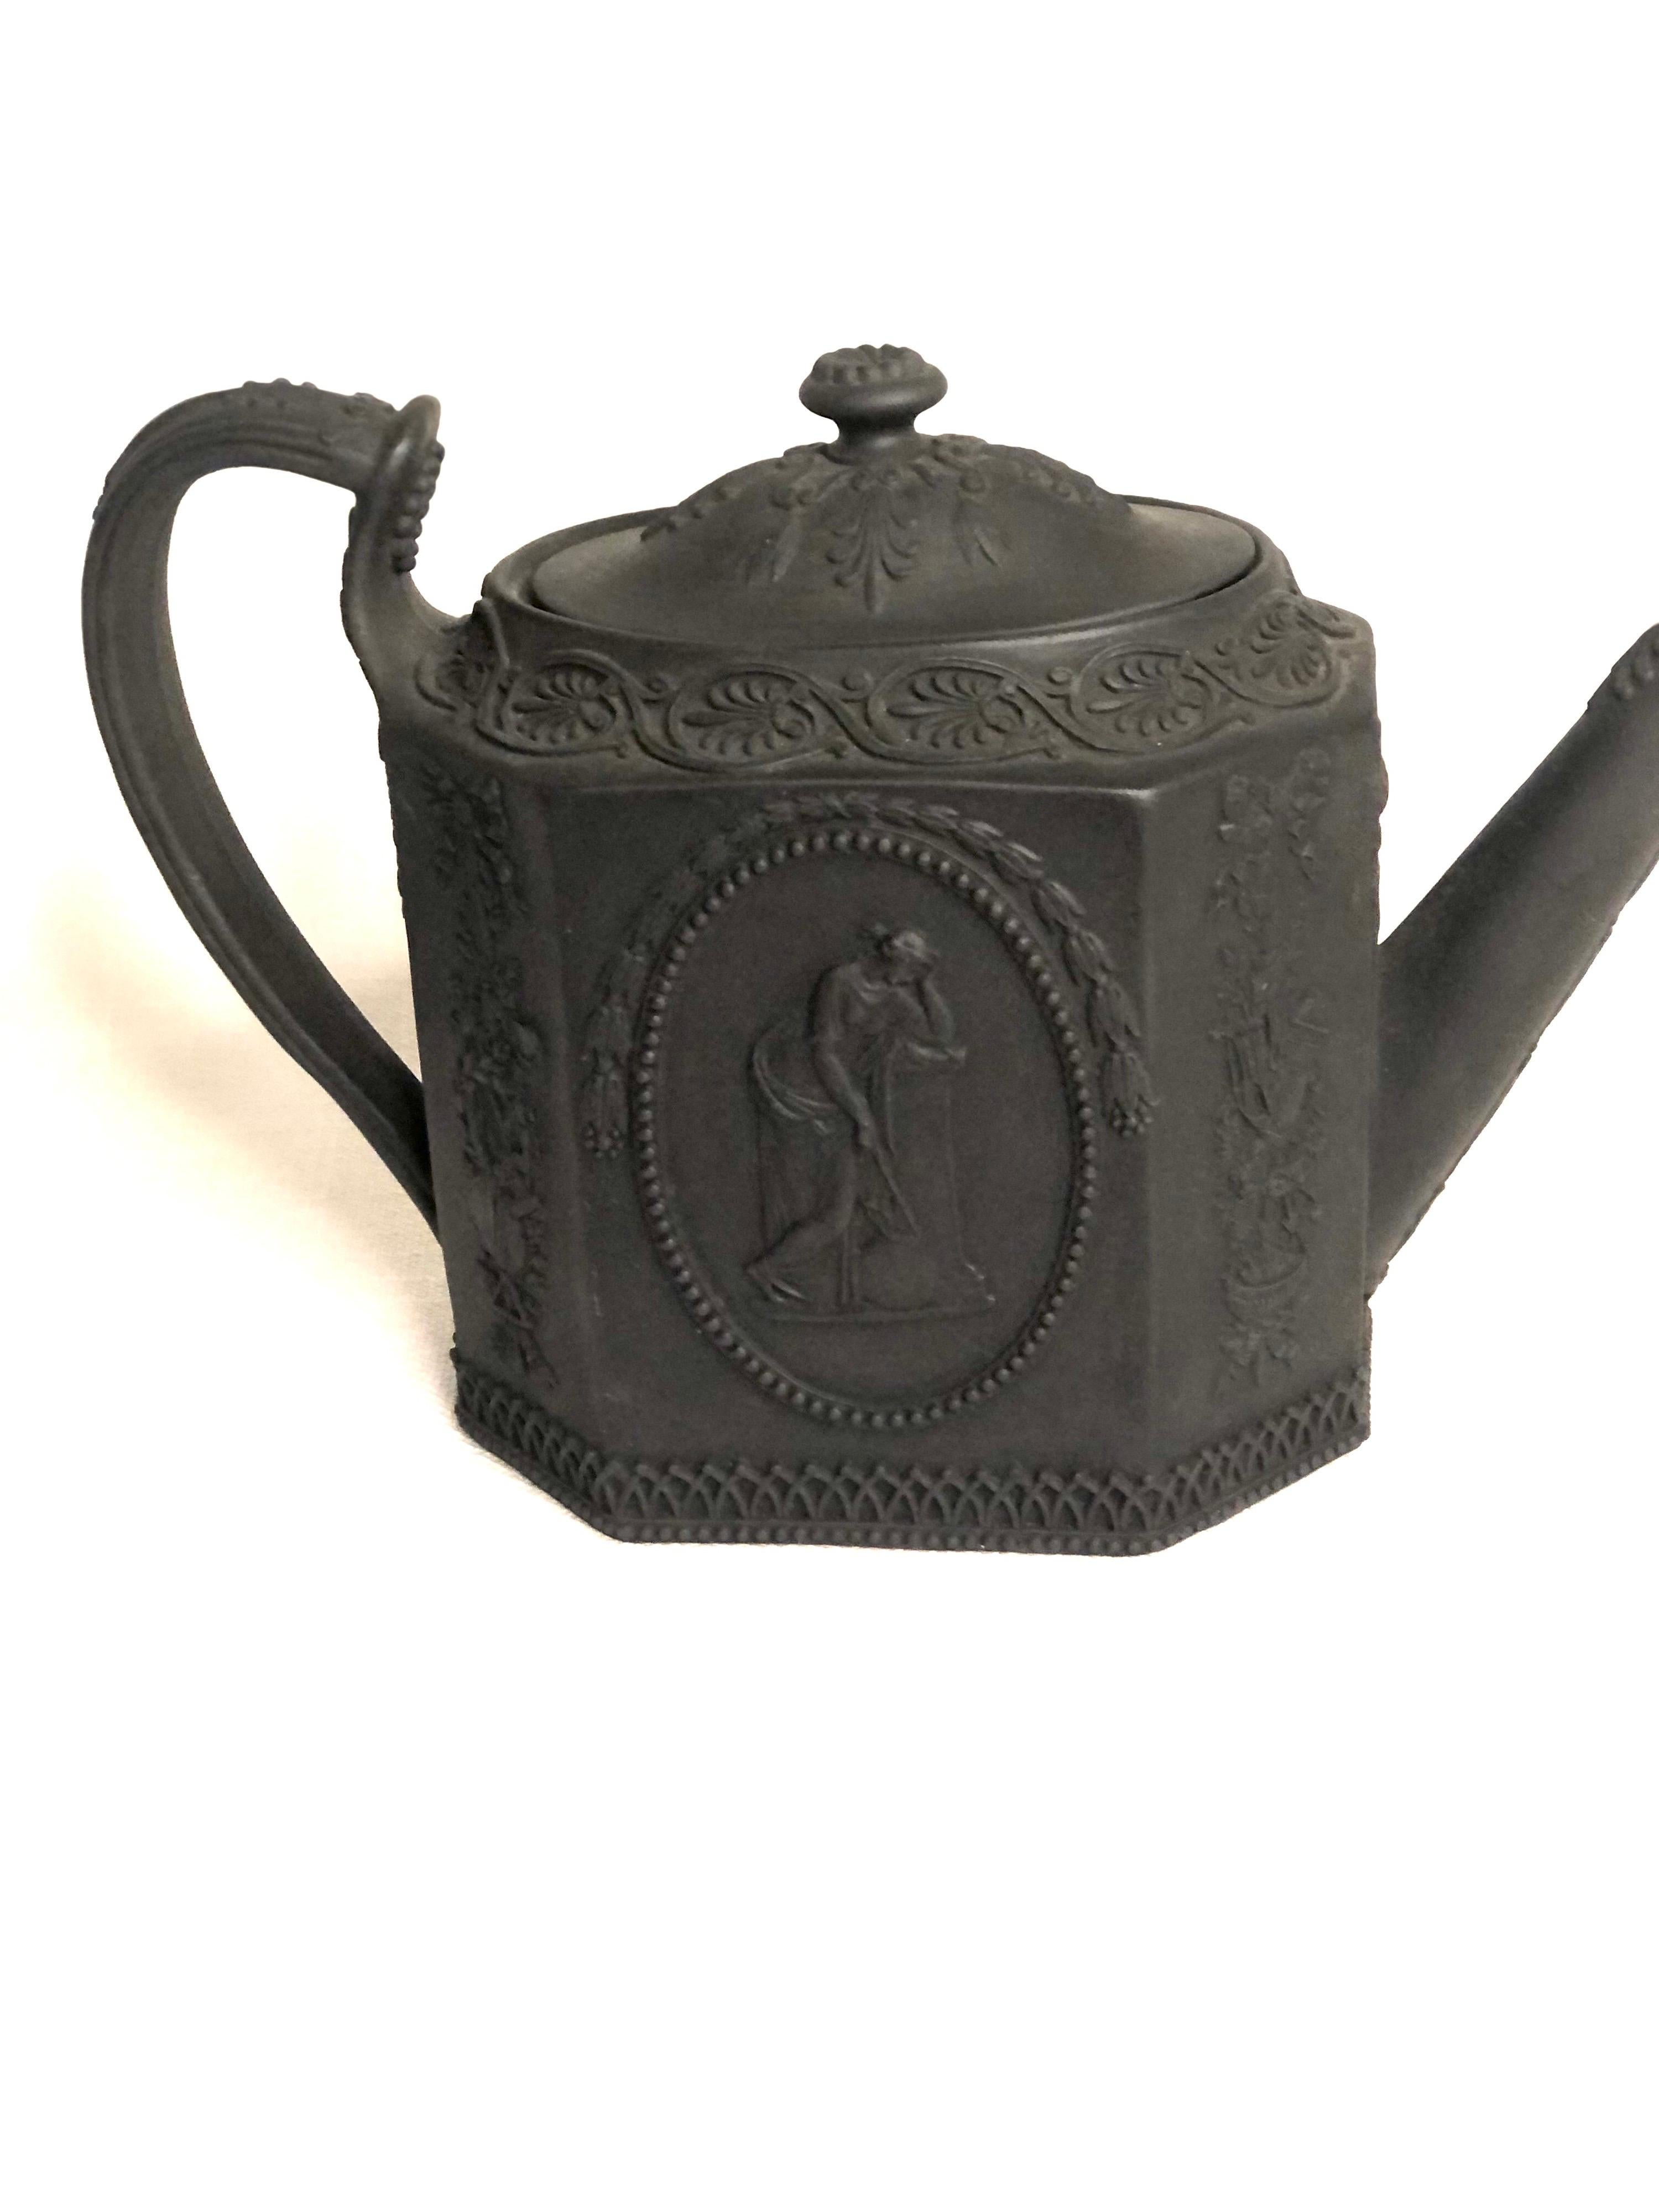 Basalt Wedgwood Teapot with Medallions of Man with Lyre and Lady on Pedestal For Sale 9